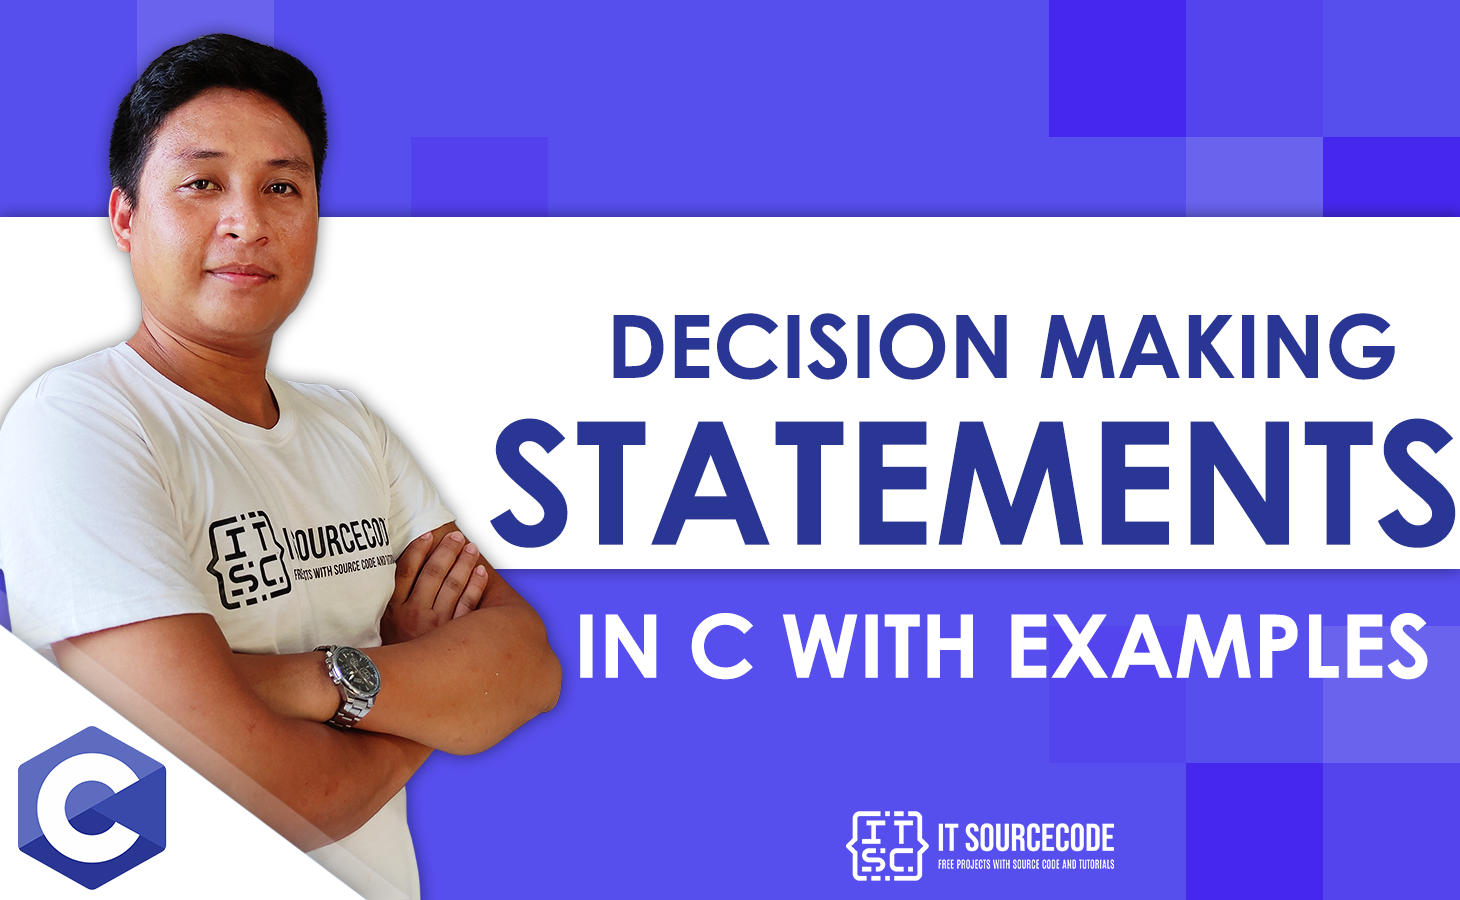 Decision Making Statements in C with Examples